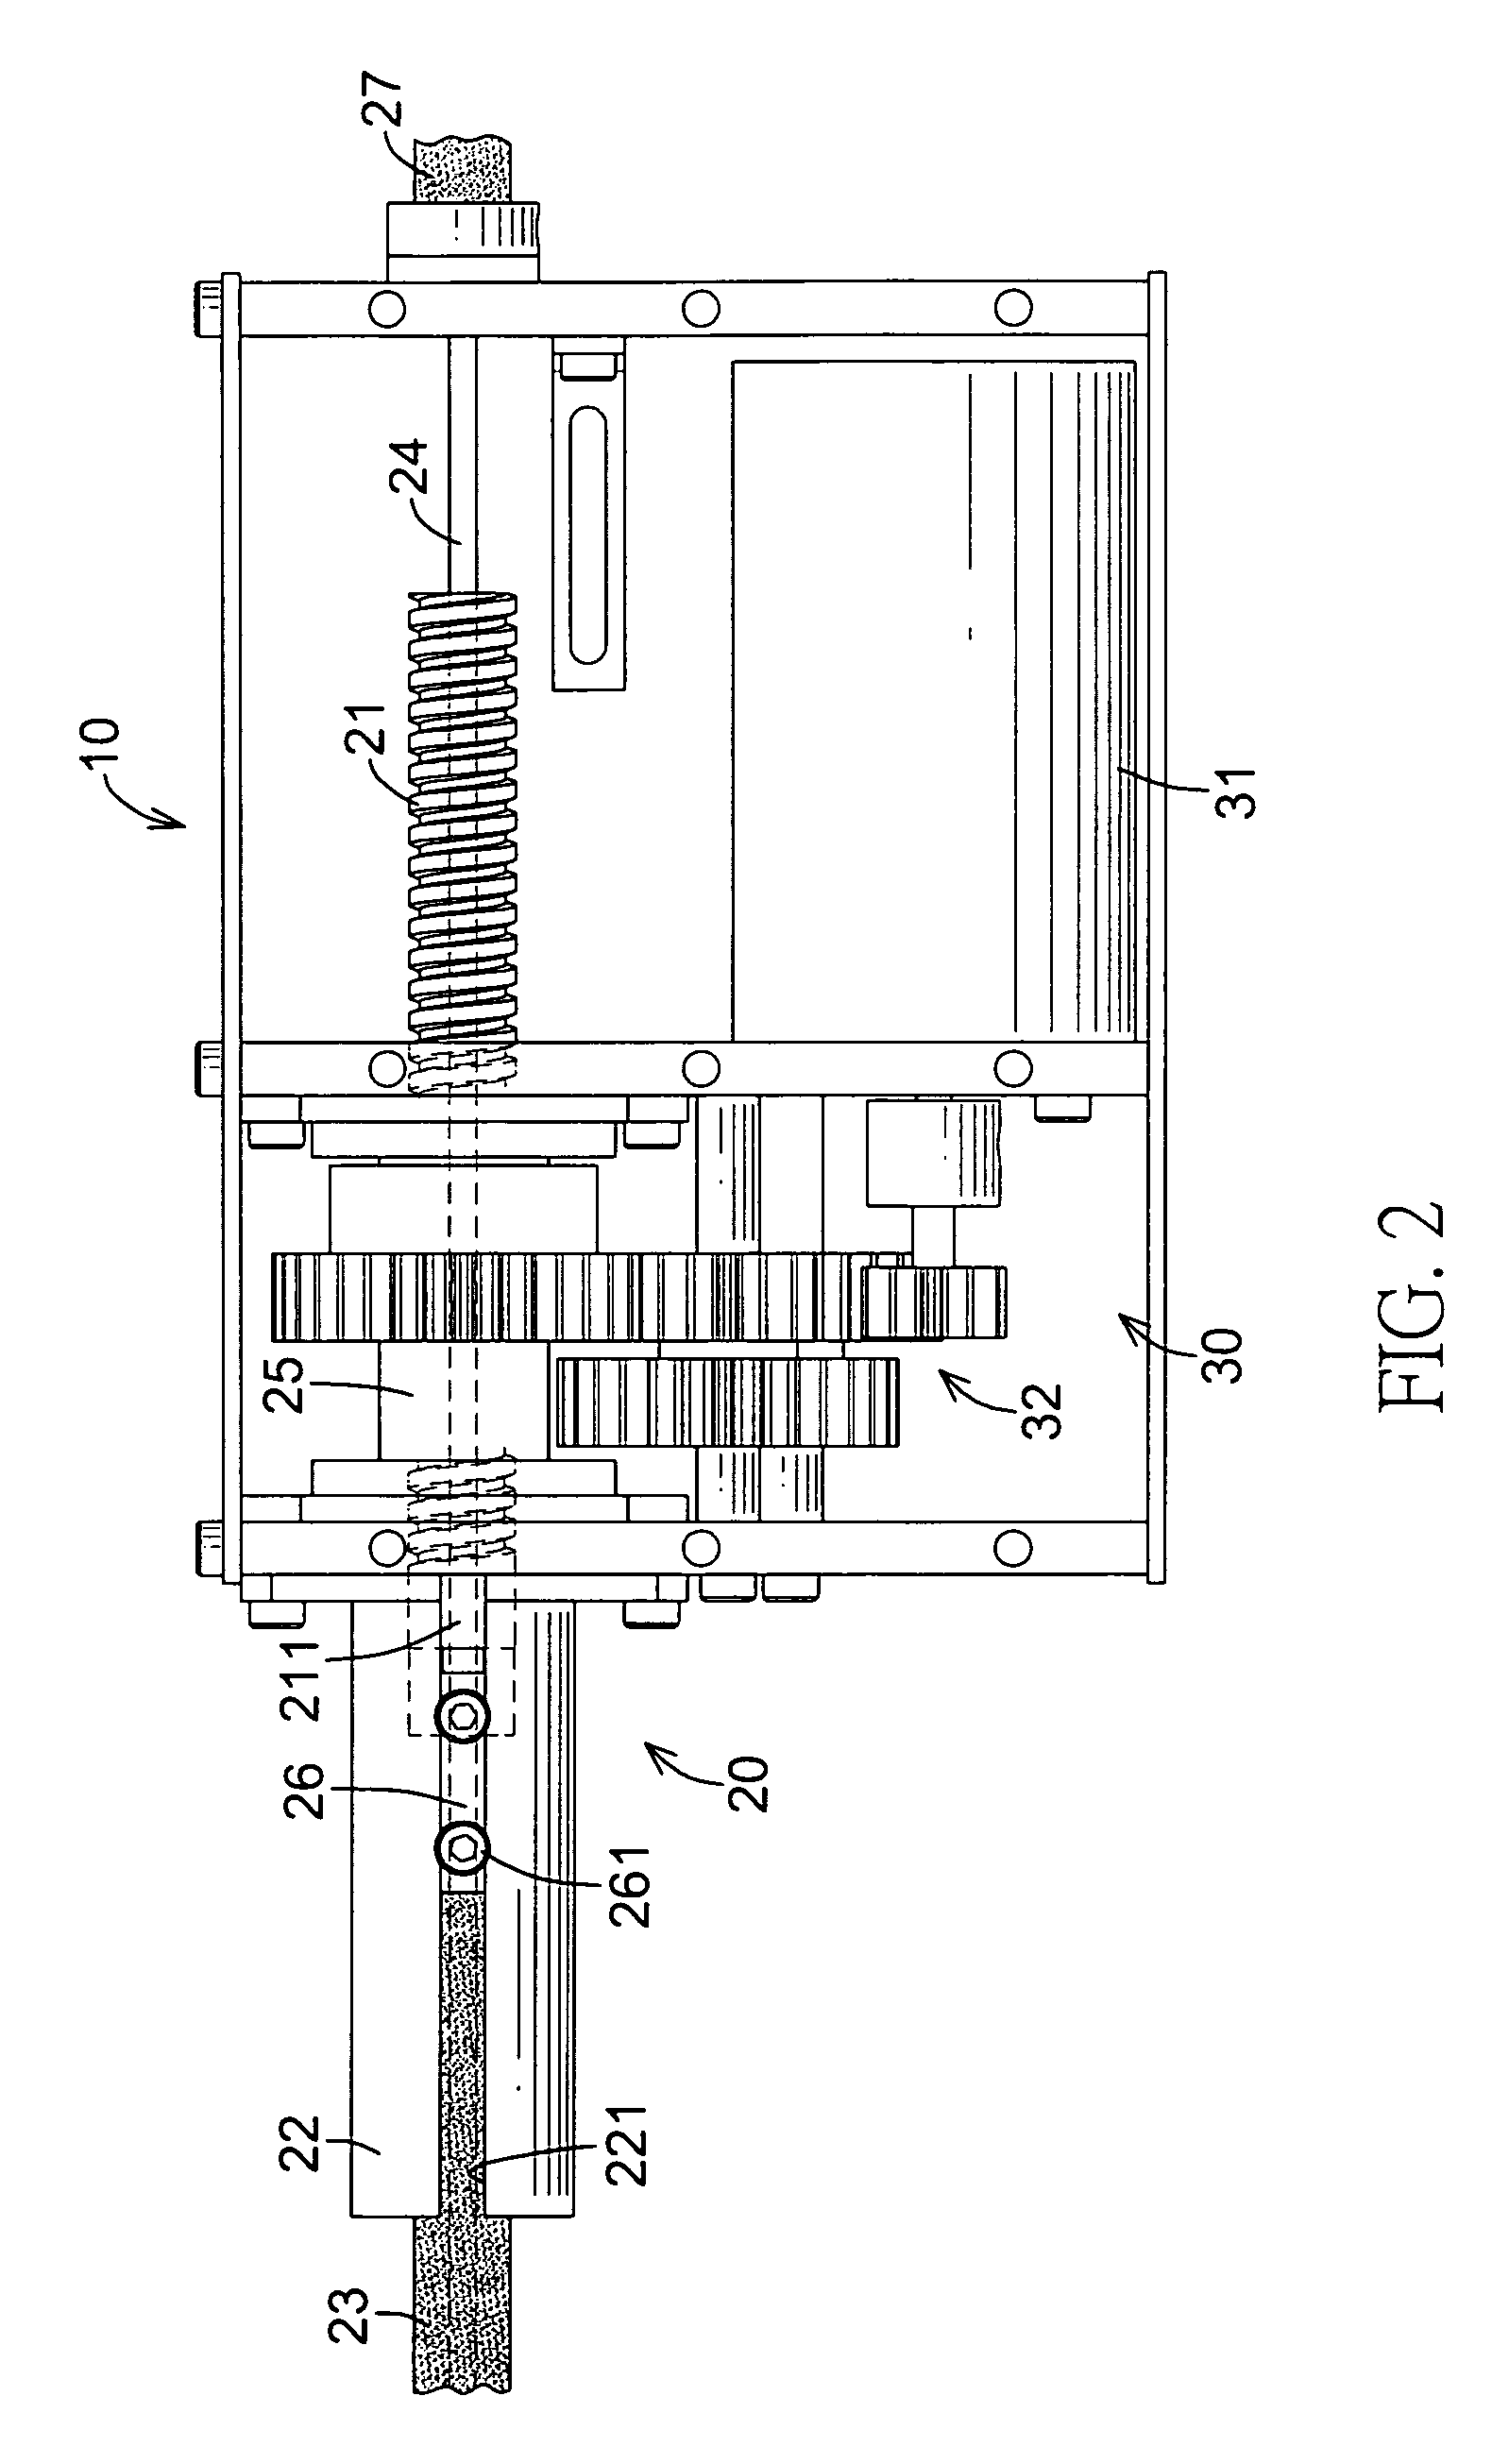 Driving device for a parking brake system